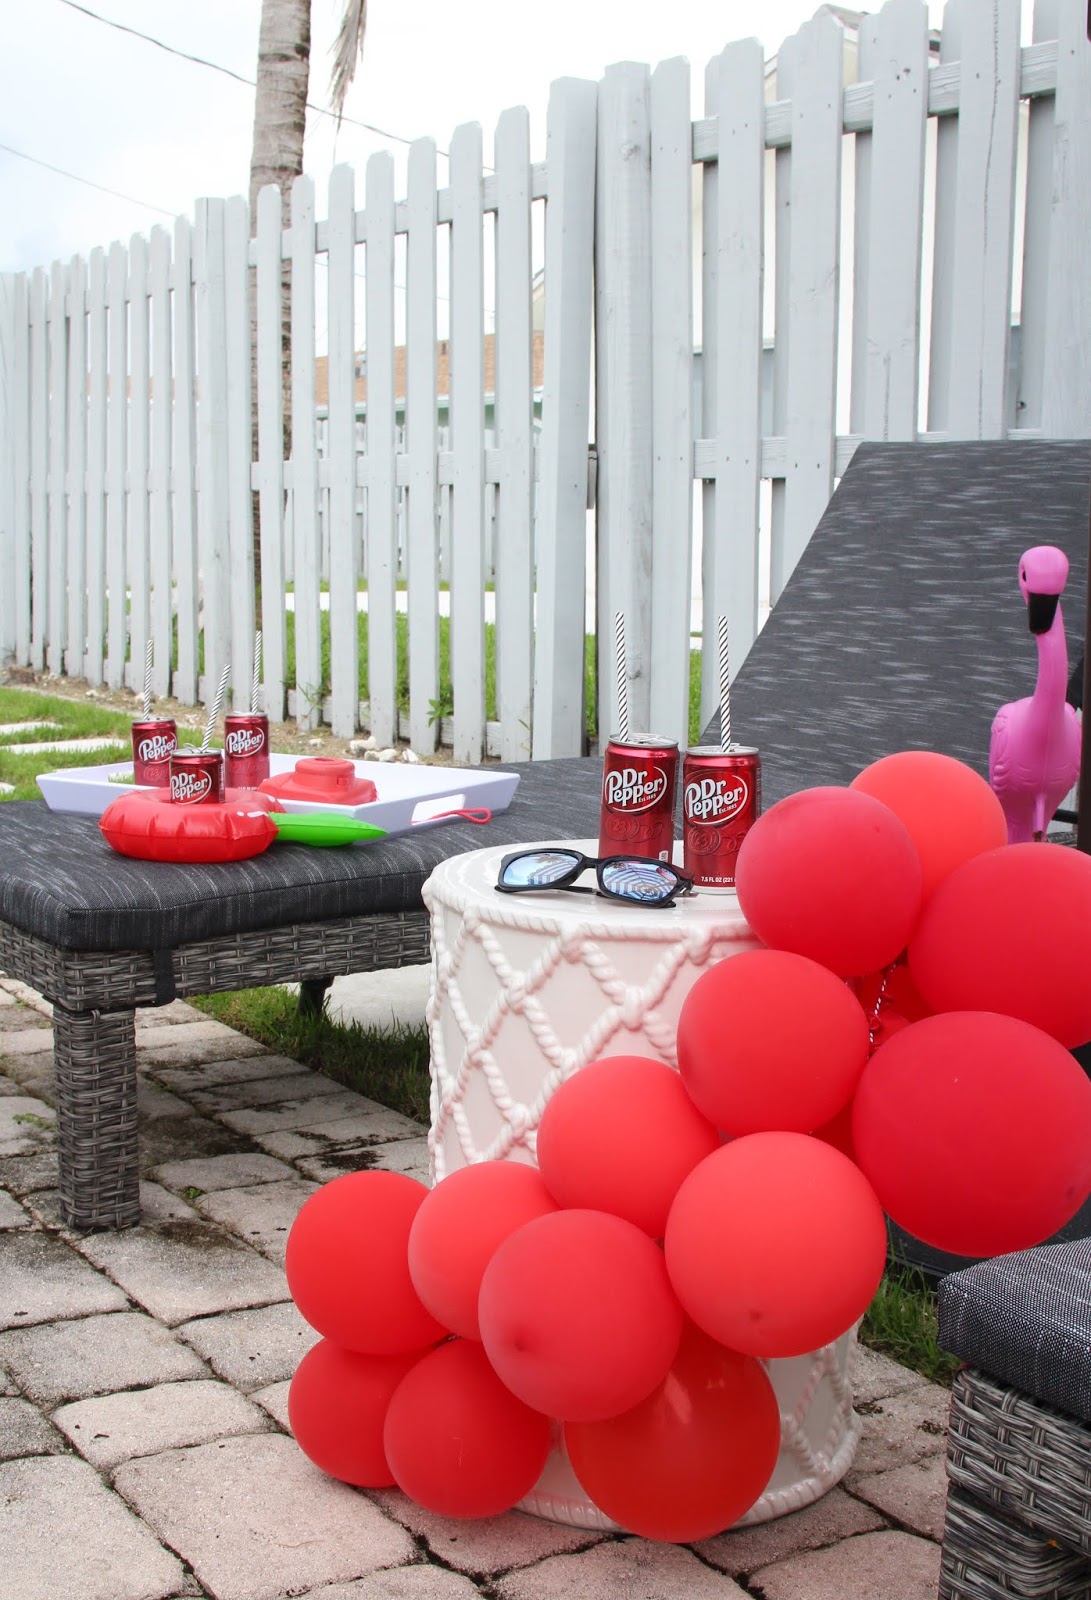 5 Things You Need to Throw an Epic Pool Party by The Celebration Stylist